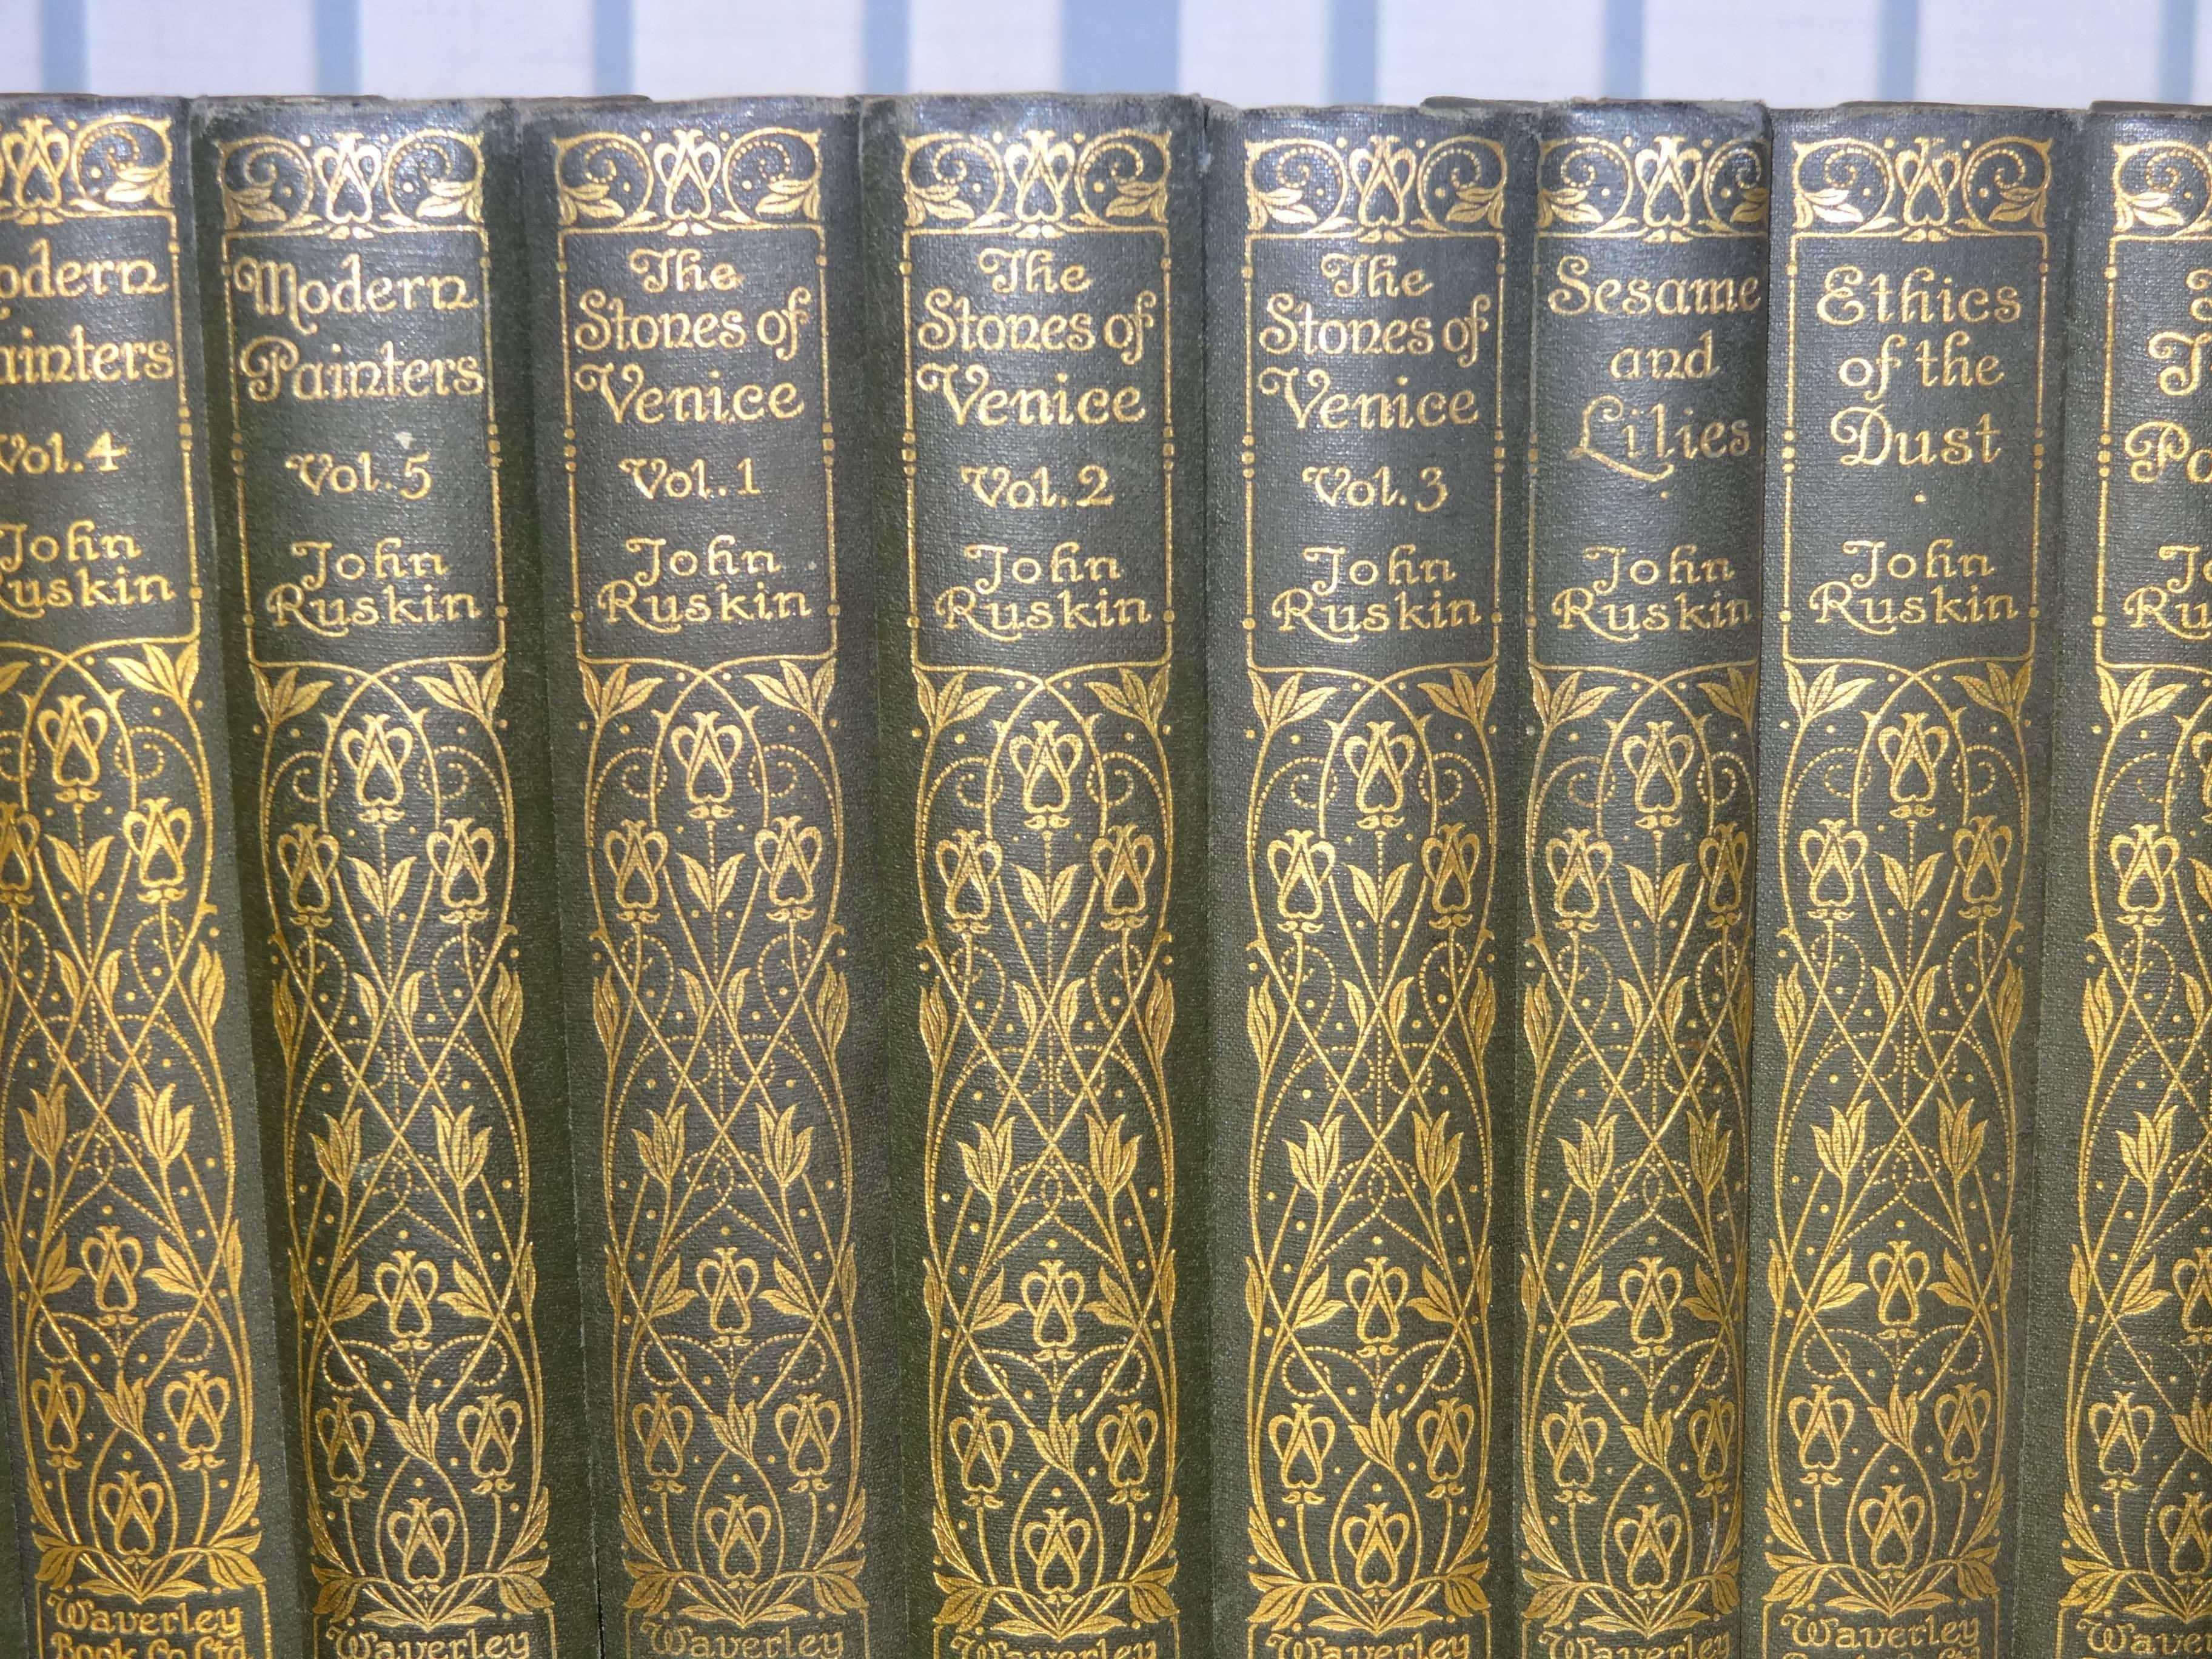 This complete set of the works of John Ruskin were published by the Waverley Book Company. Each book is bound in green cloth and has a very Fine gilt design and title to spine. The set is undated and the works were from the mid to end 19th